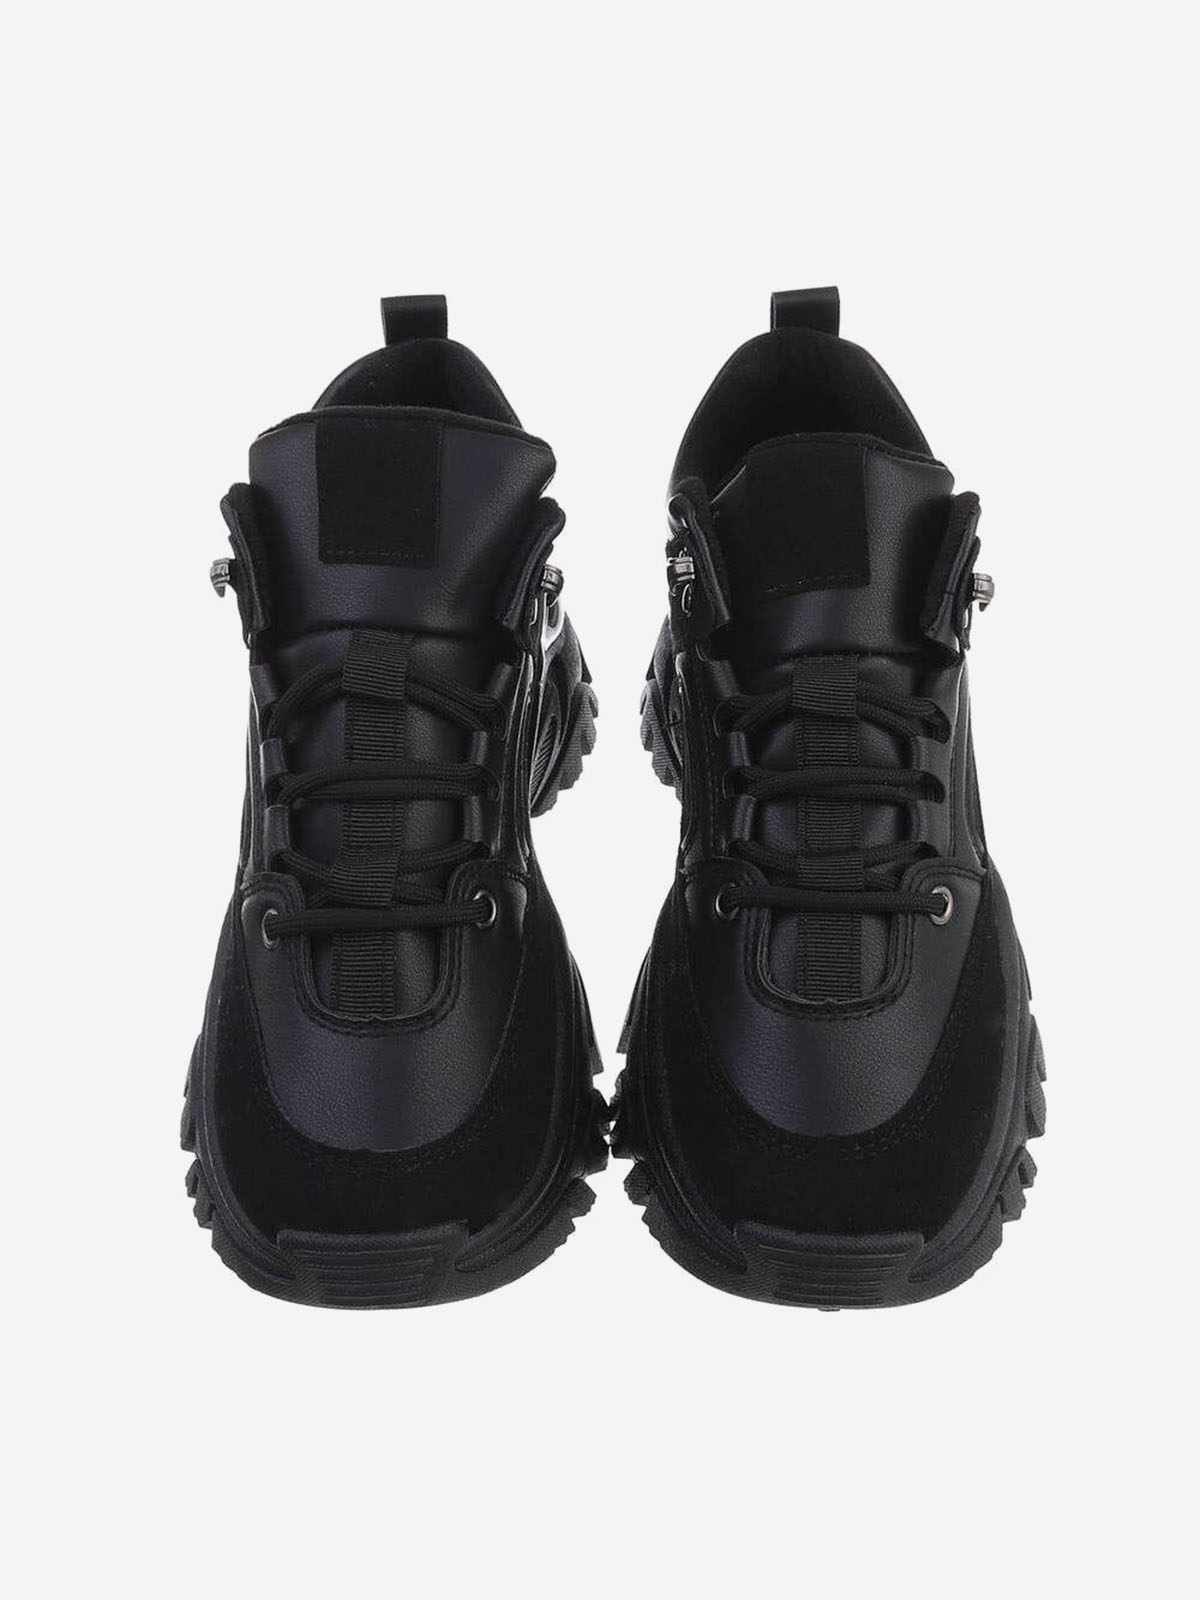 Women's sneakers with laces in black